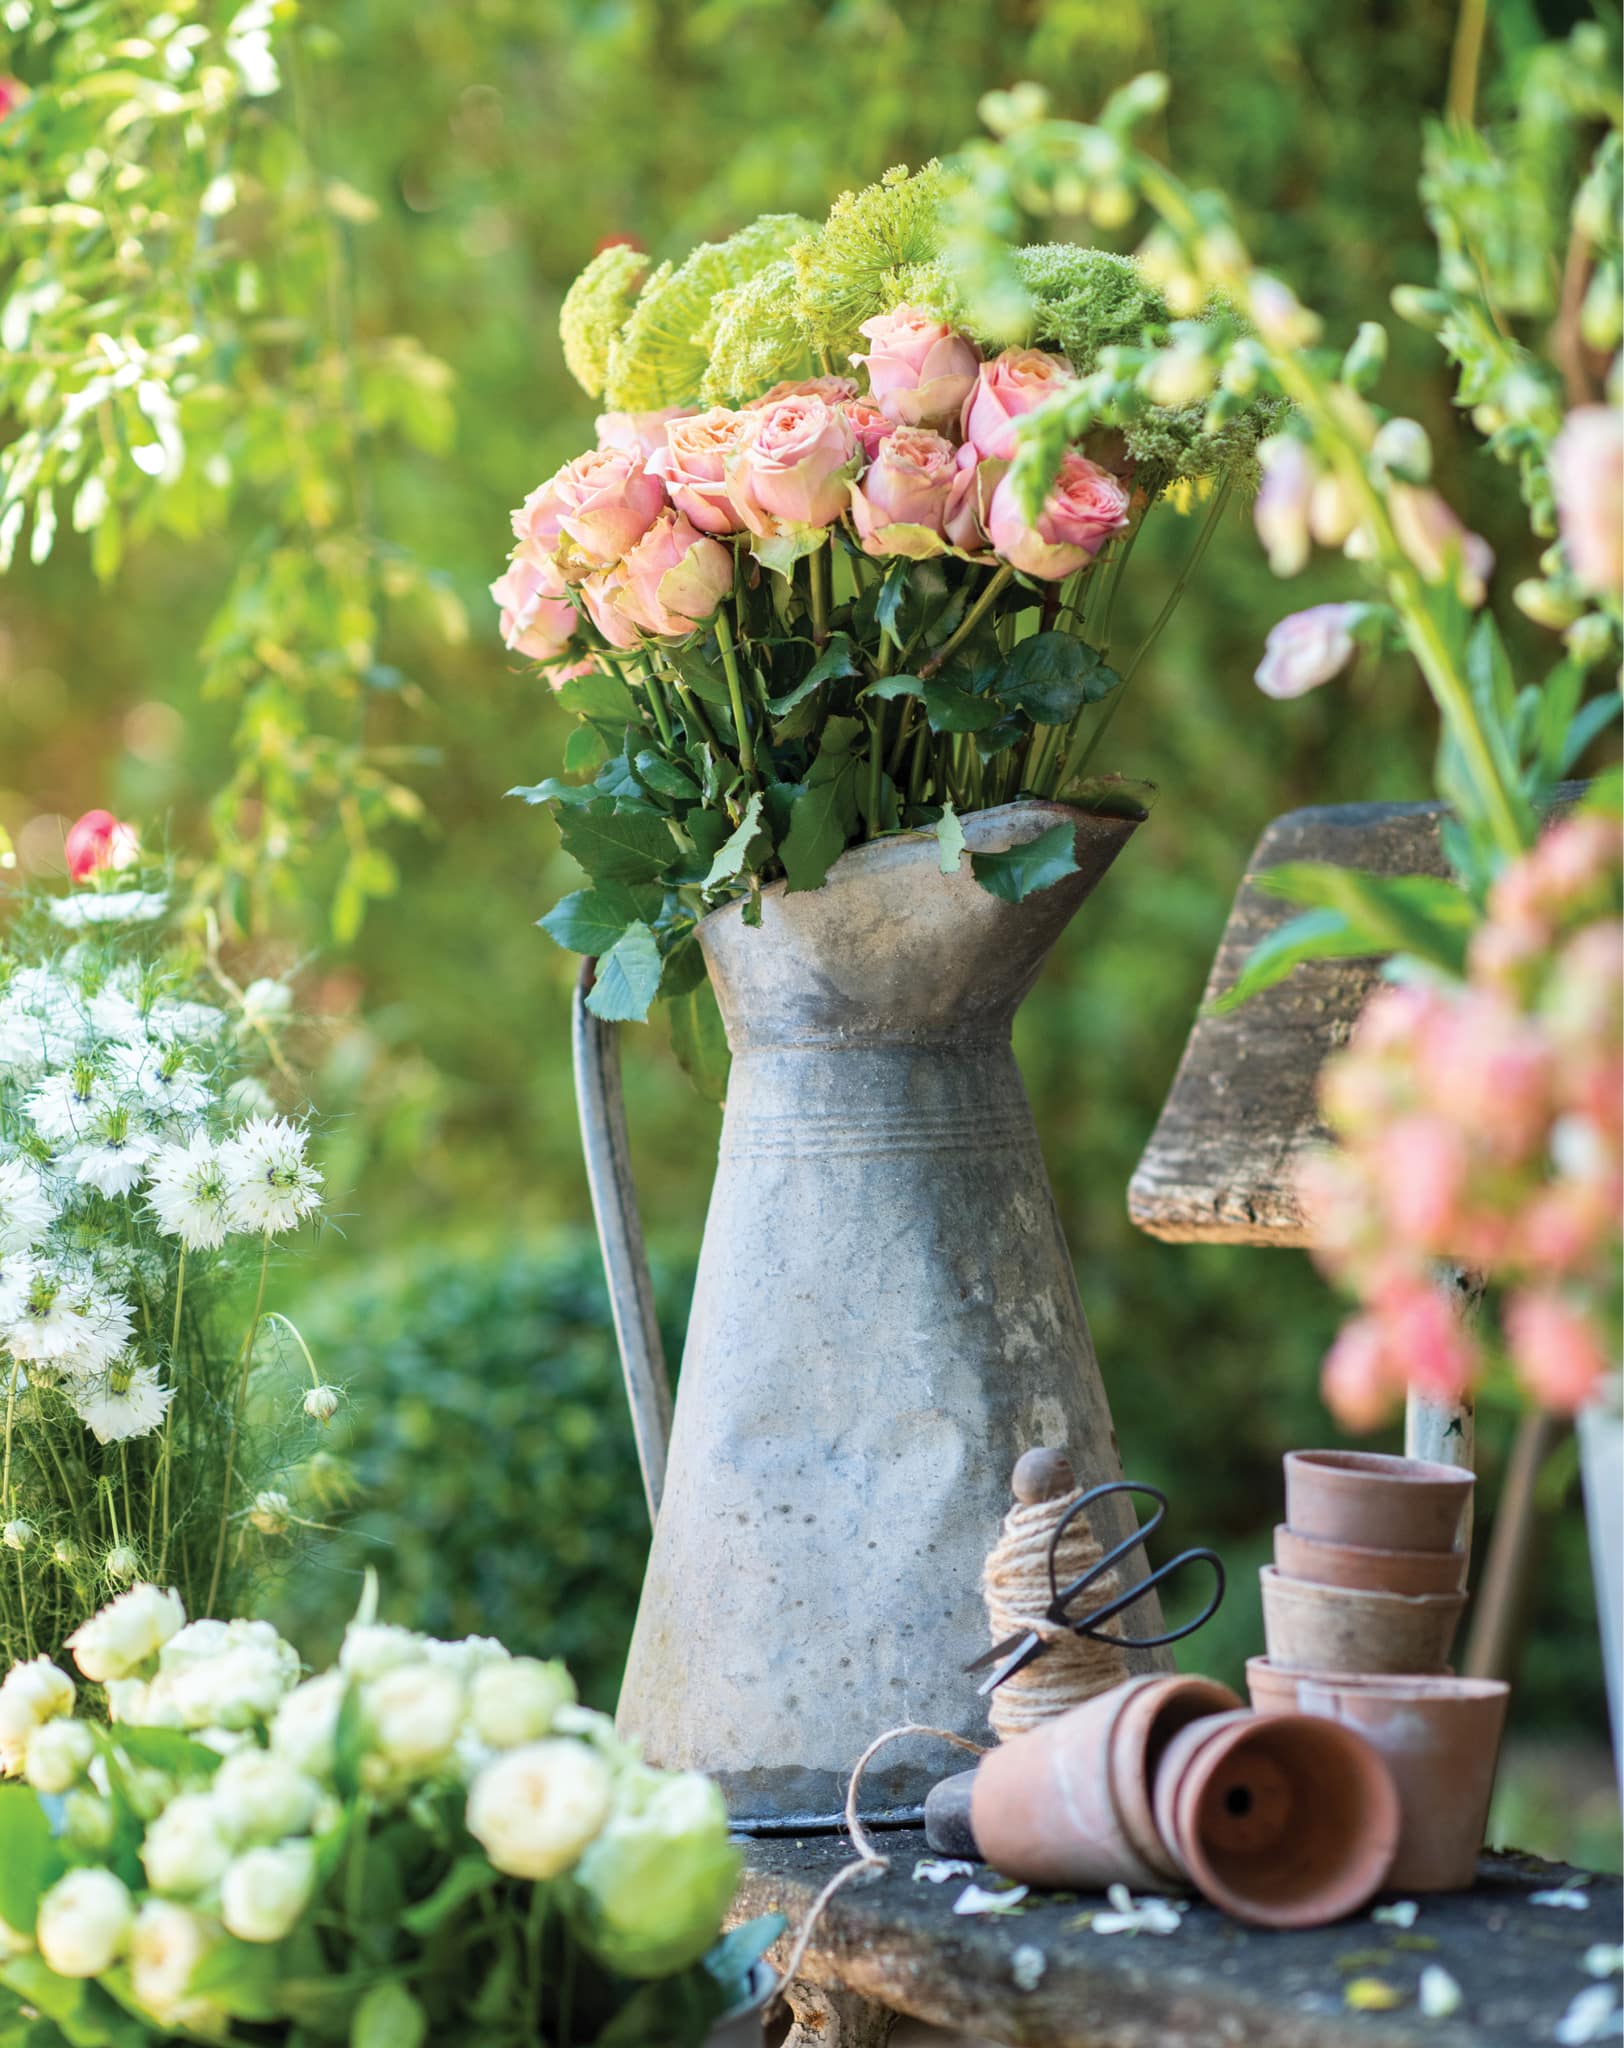 French Blooms: Floral Arrangements Inspired by Paris and Beyond by Sandra Sigman Founder of Les Fleurs - flowers